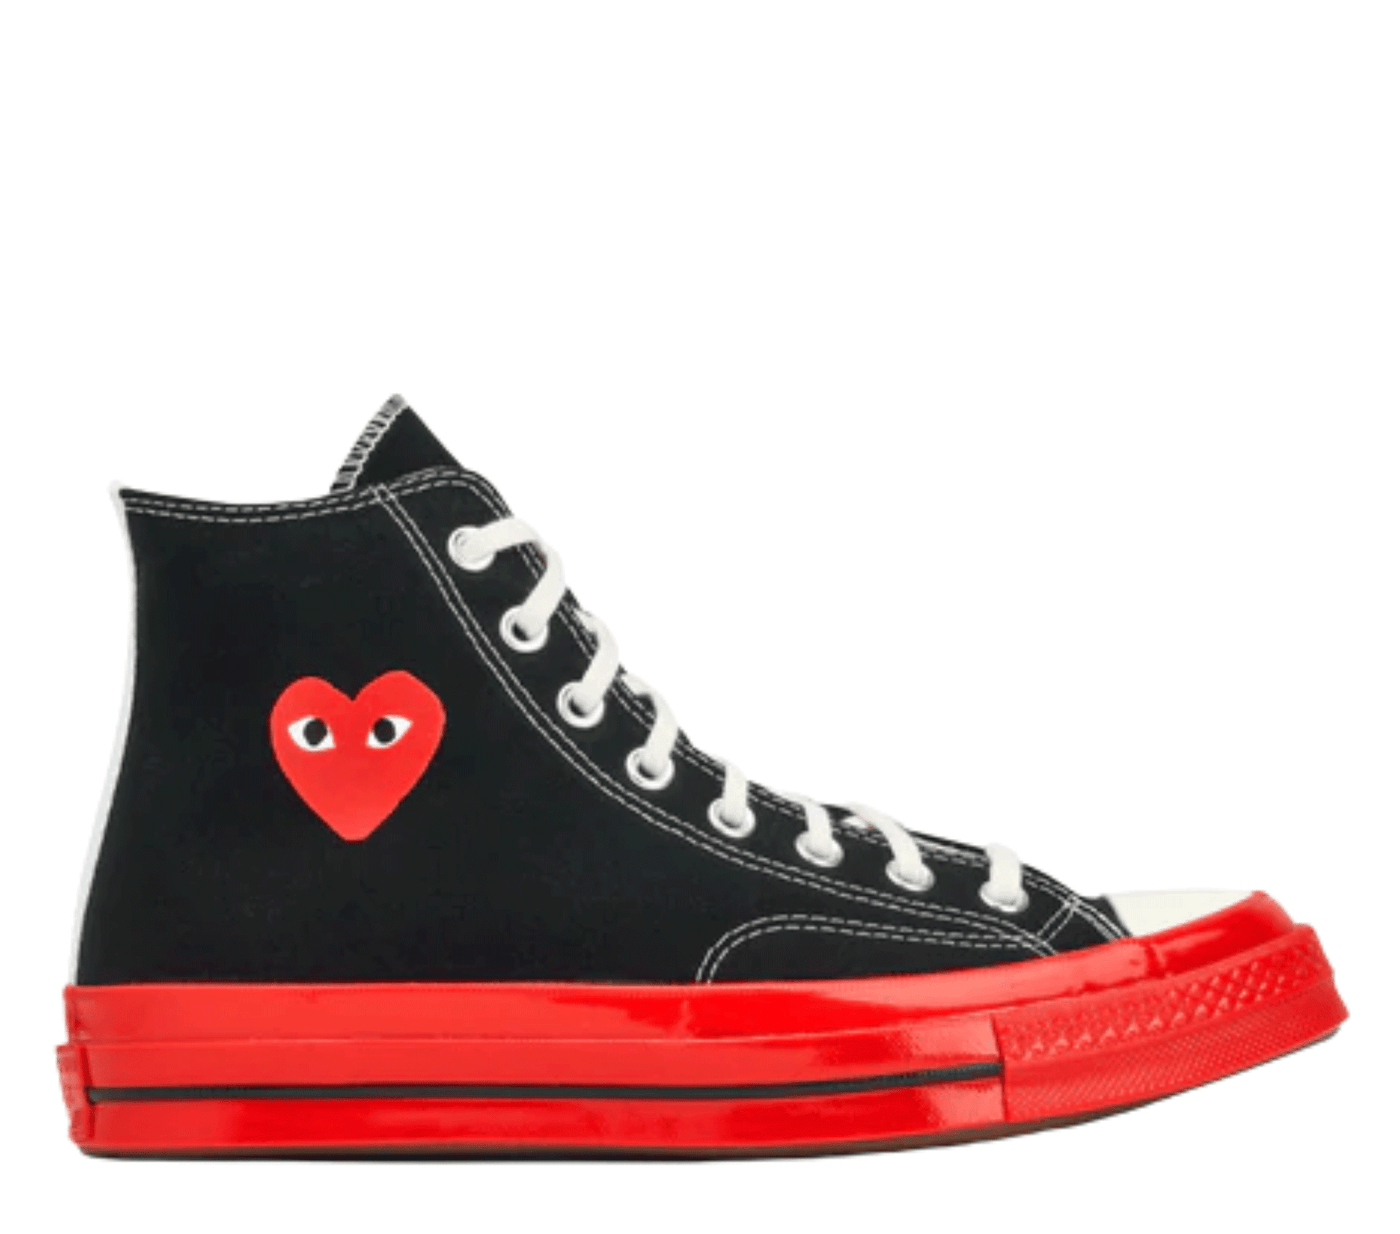 Comme-des-Garcons-Play-Converse-High-Top-Chuck70-Red-Sole-Black-1